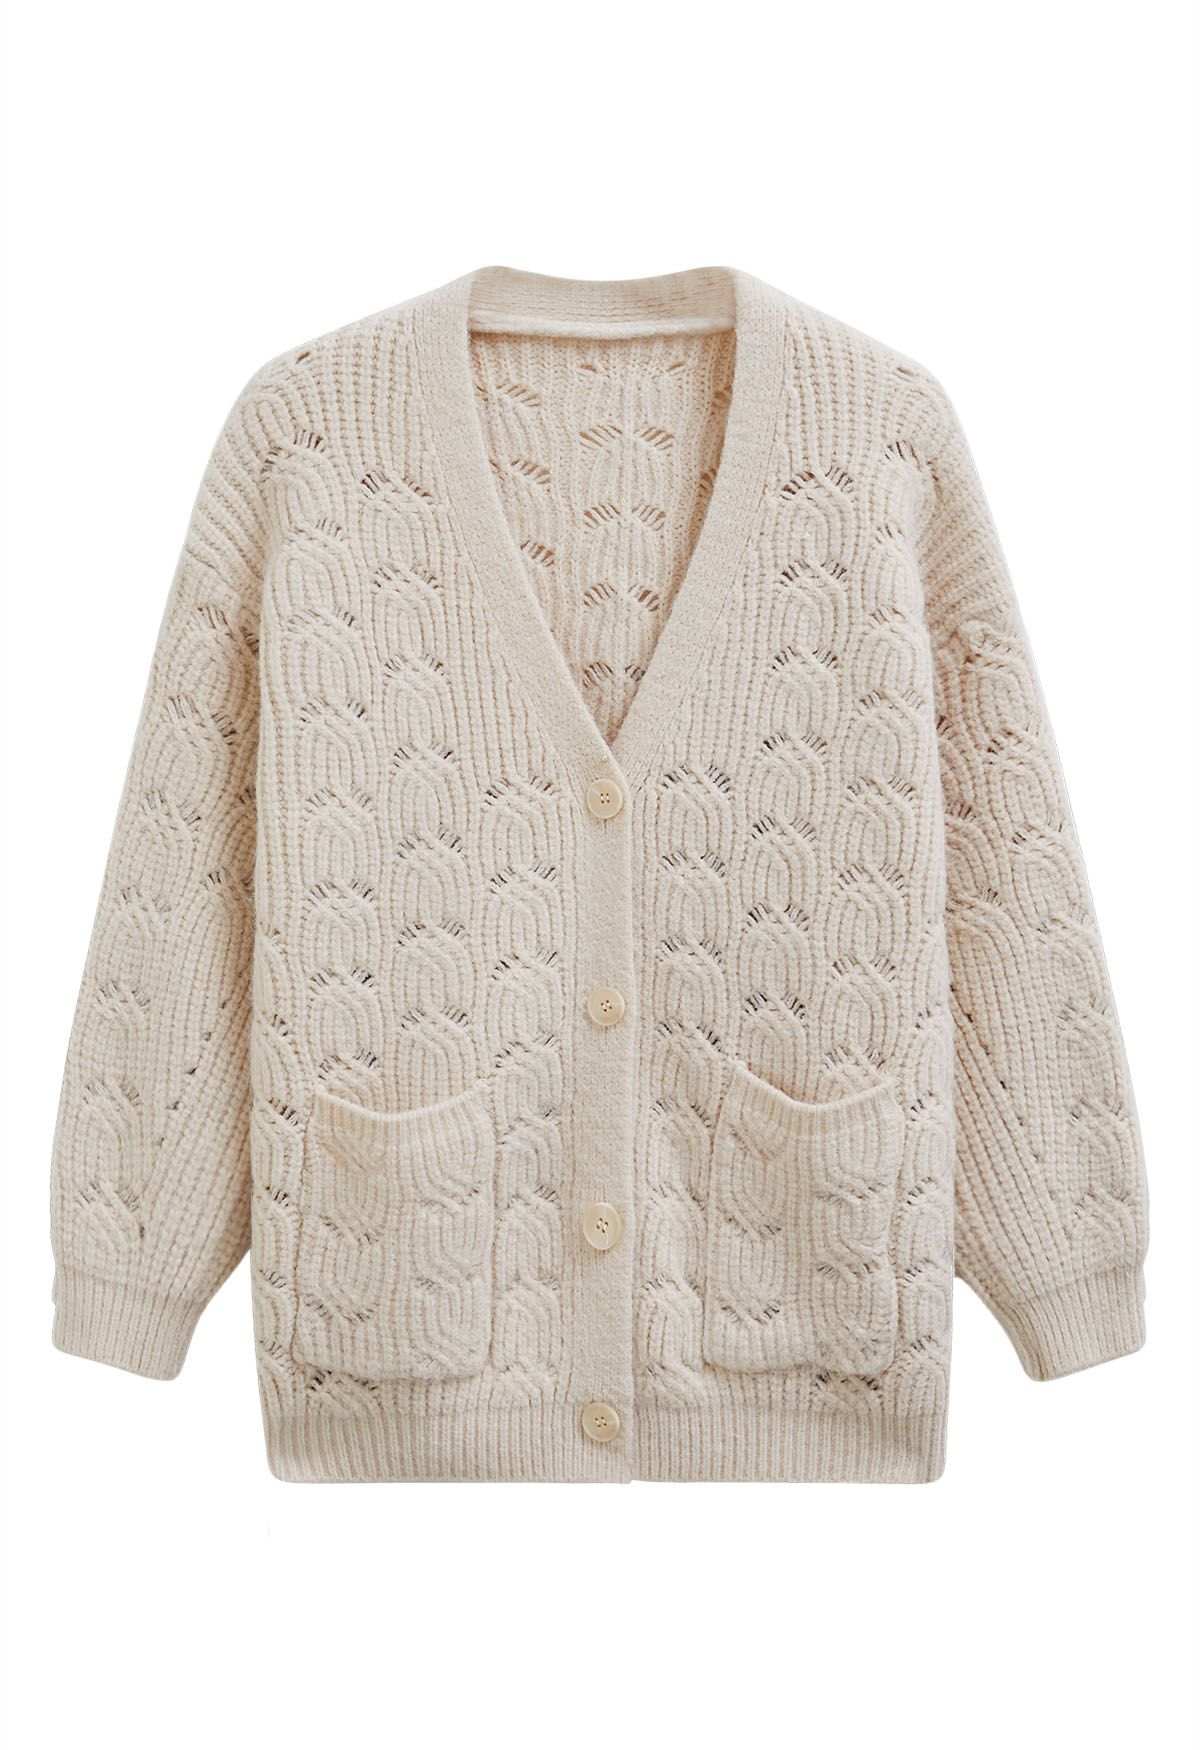 Button Front Pointelle Knit Cardigan in Oatmeal - Retro, Indie and